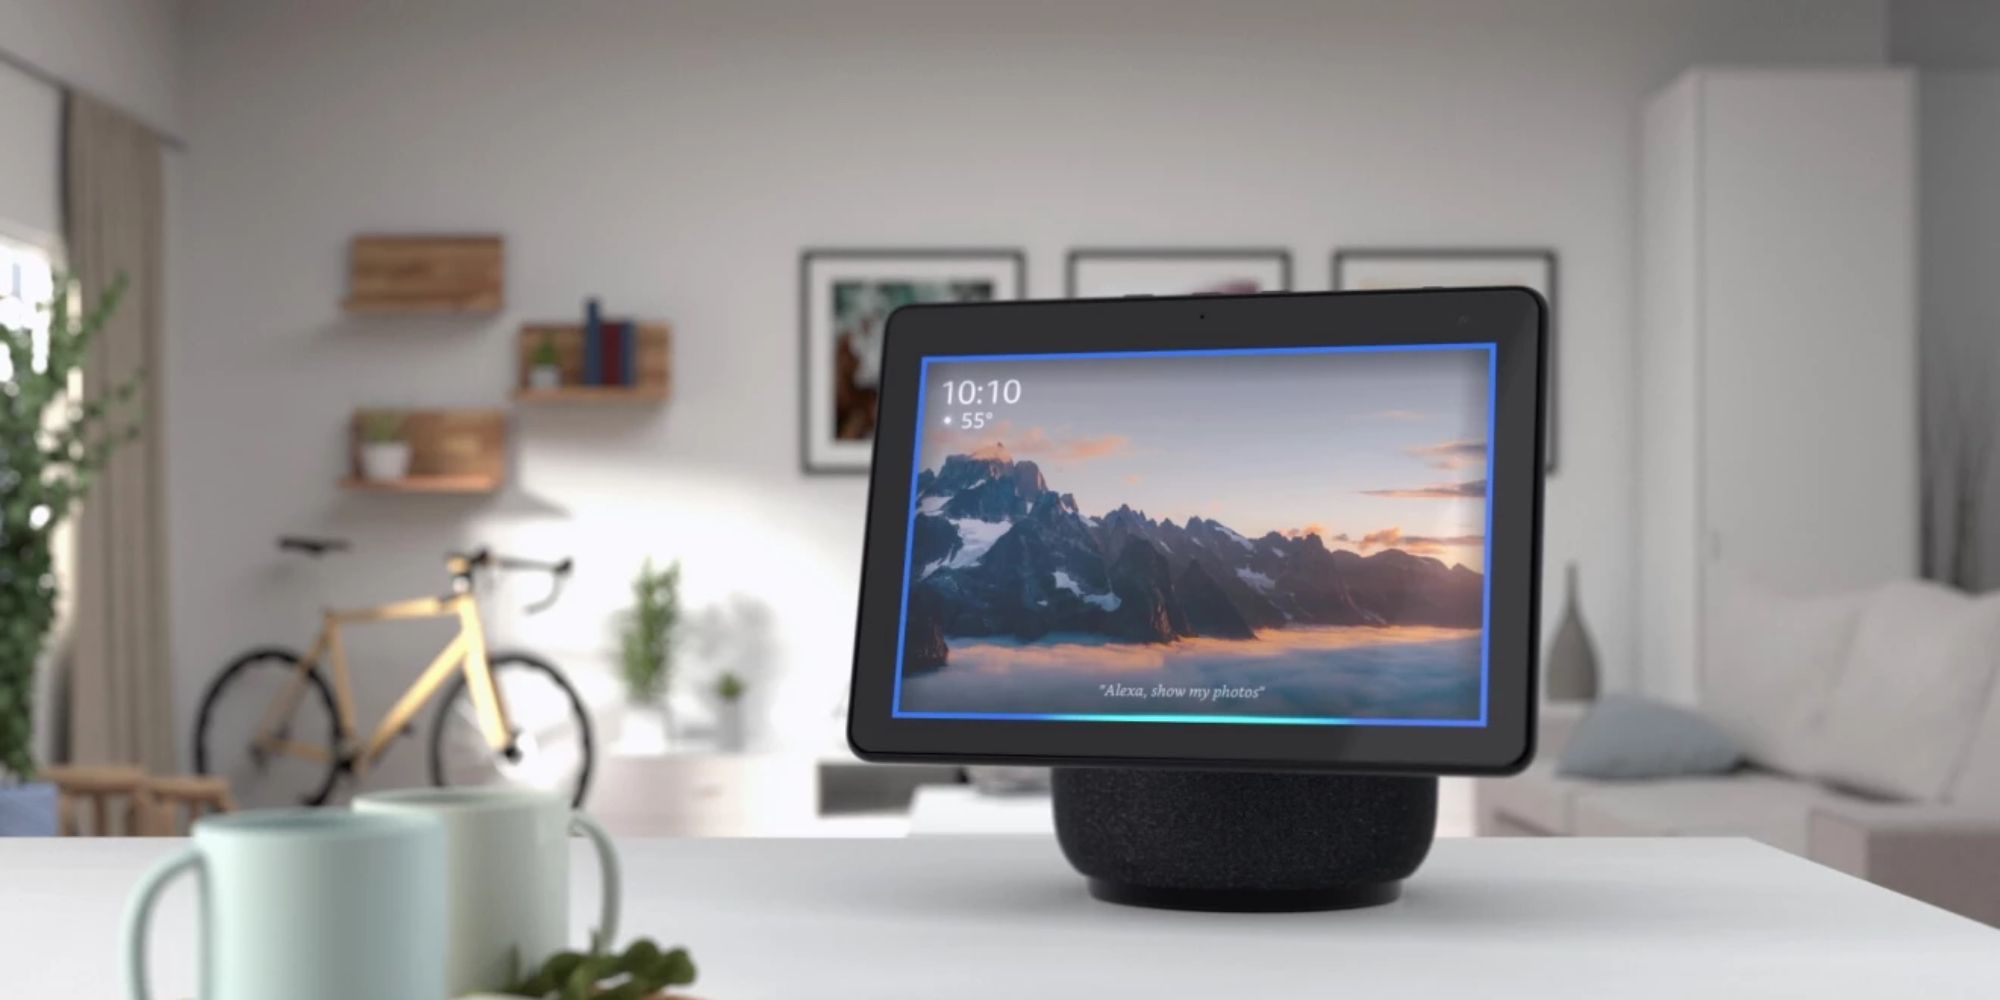 Amazon Echo Show 10 with Conversation Mode enabled